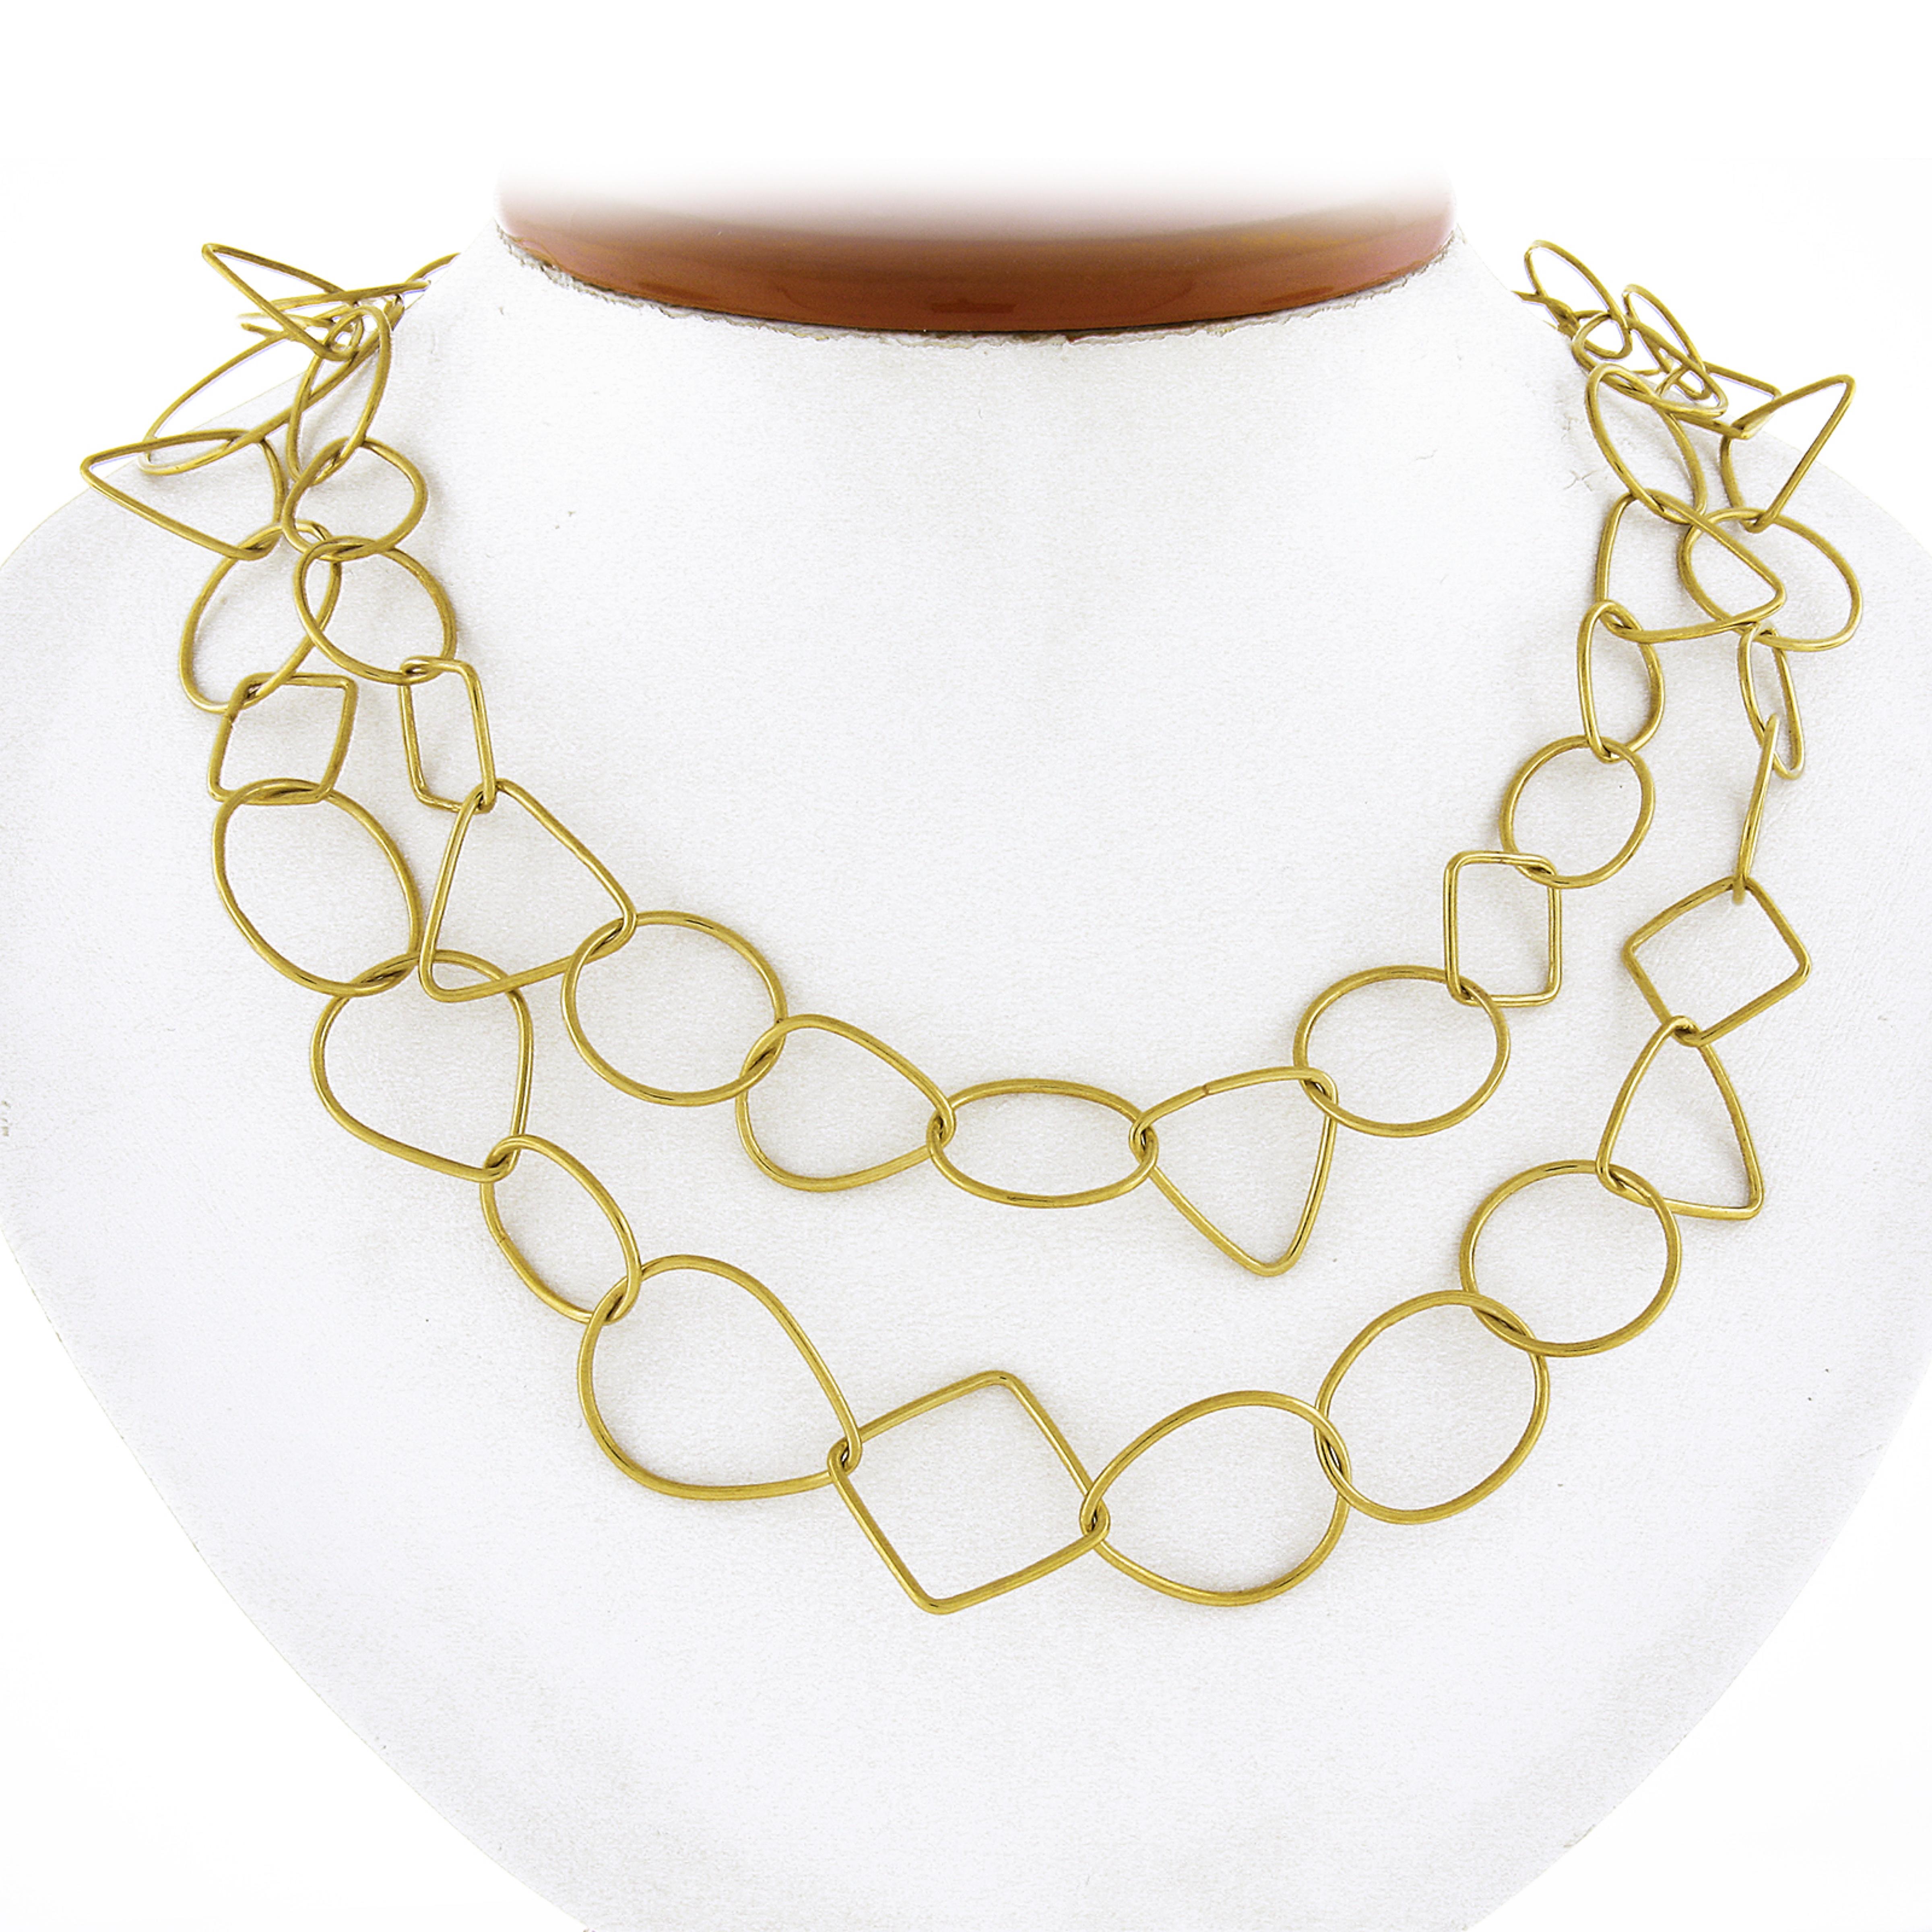 This statement 18k yellow gold necklace features open, geometric shaped wire links which elegantly interlocking showing absolutely luscious look throughout. The chain displays beautiful long look measuring 36 inches overall, and is secured with hook